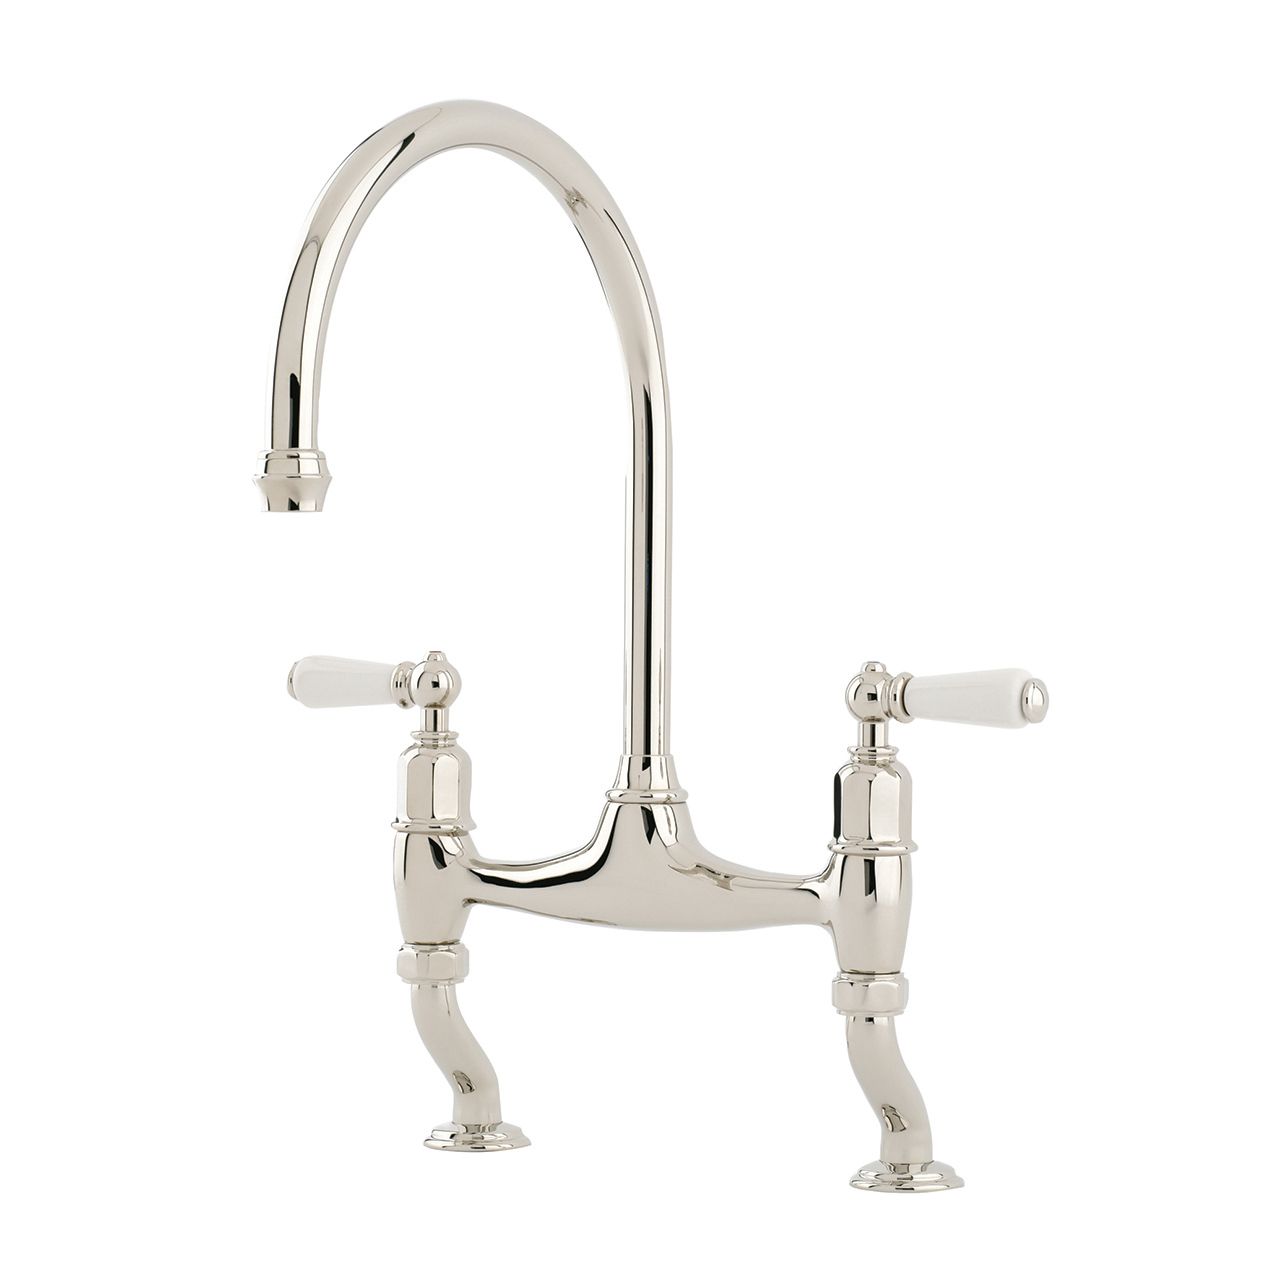 Ionian Deck Mixer Tap with white Porcelain Lever Handles  a Nickel Finish – Perrin & Rowe